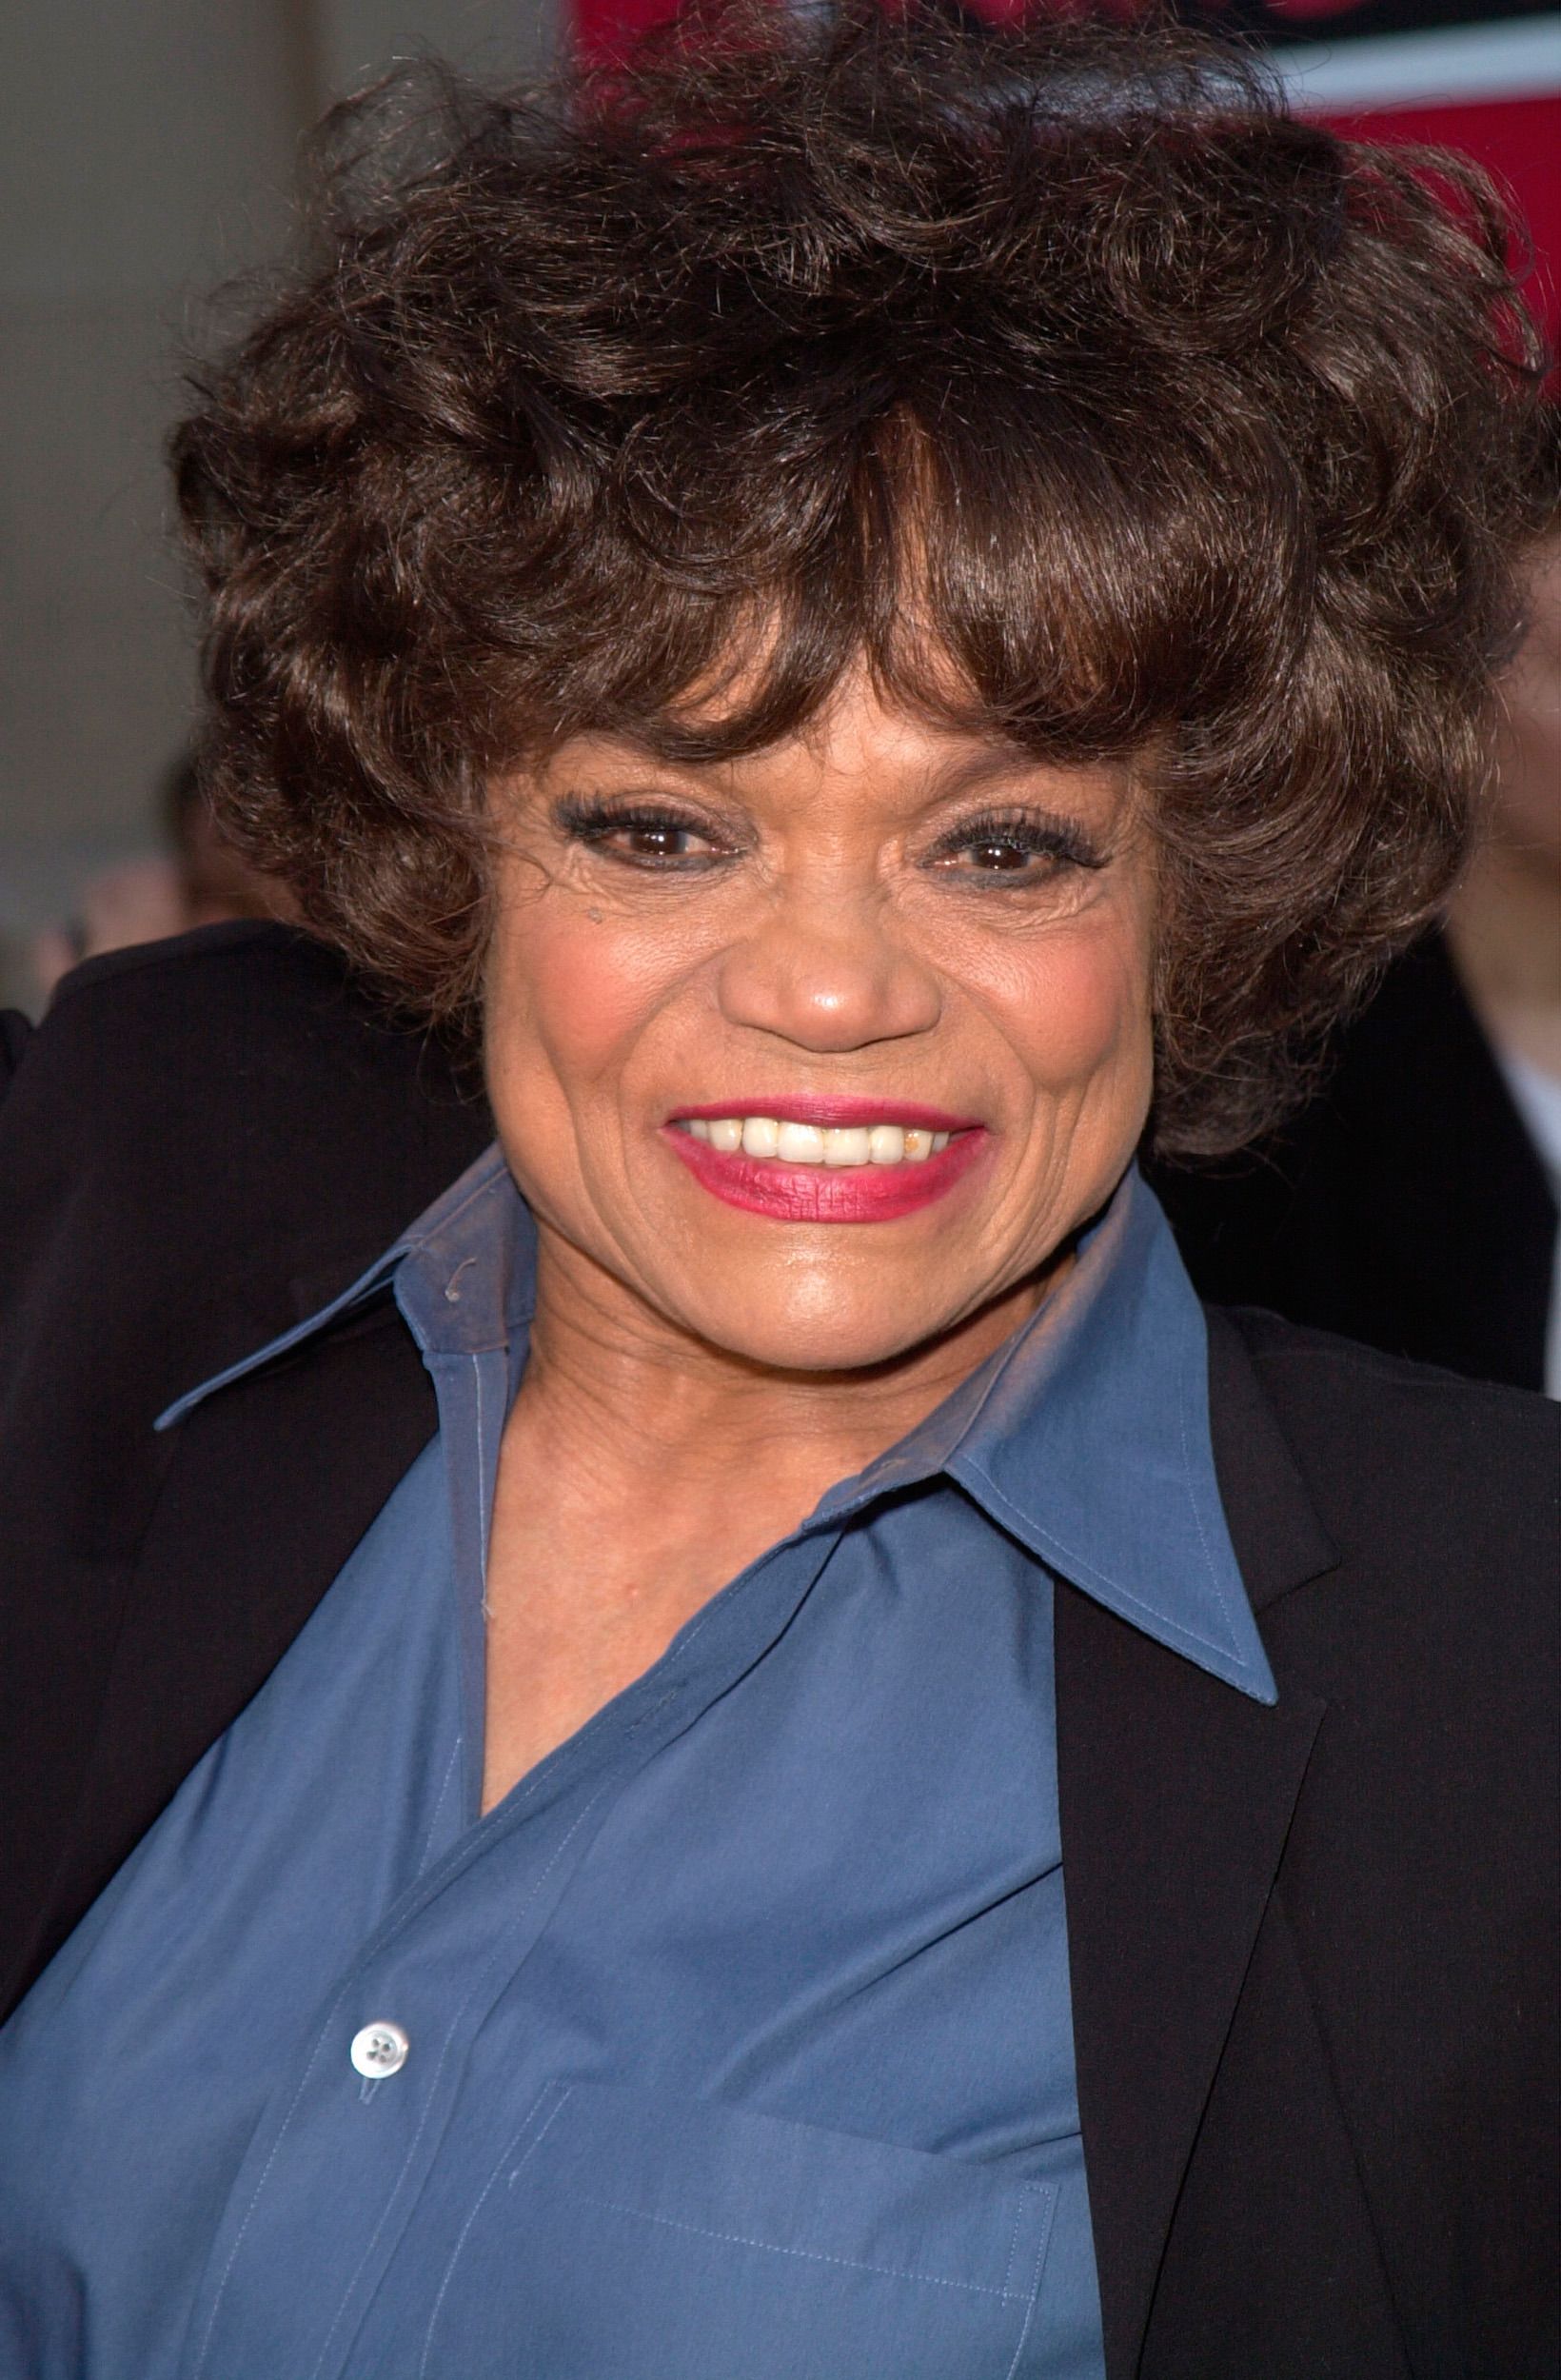 Eartha Kitt at the world premiere in Hollywood of Disney's The Emperor's New Groove, December 10, 2000. | Source: Shutterstock